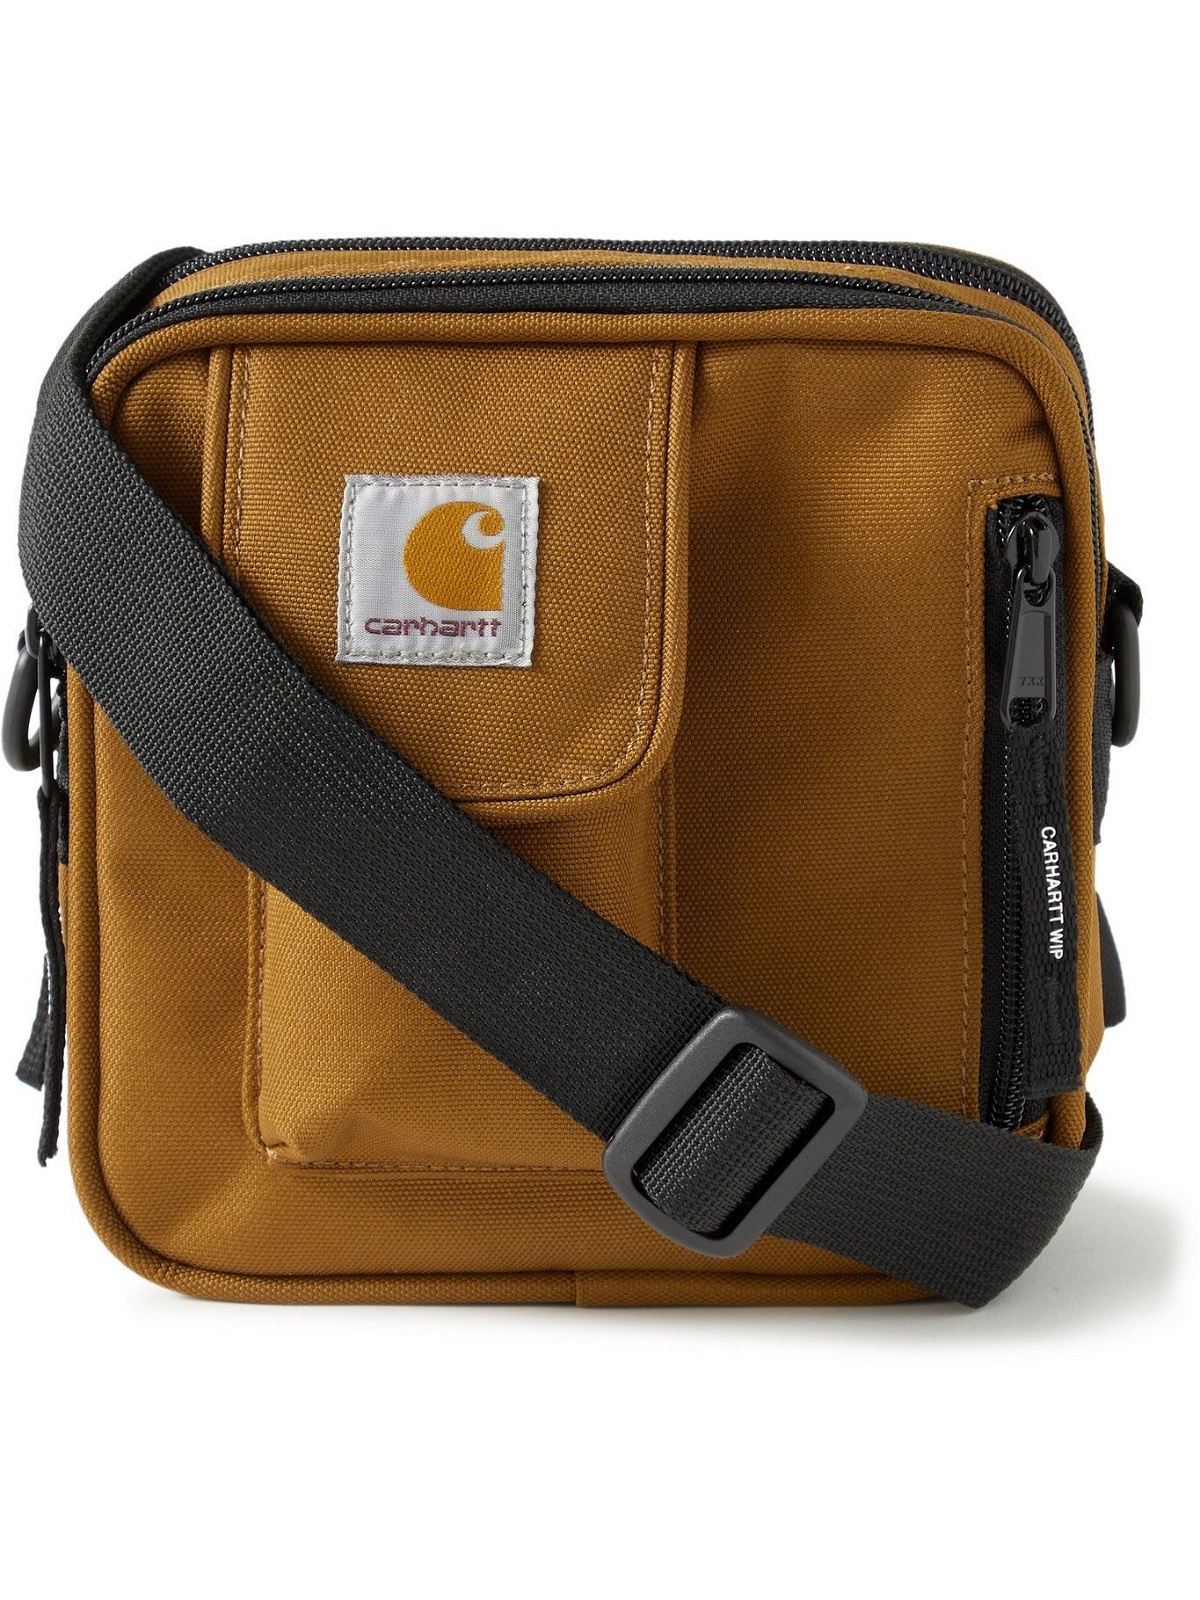 carhartt wip delta shoulder bag (they must work at the same factory??) :  r/Carhartt